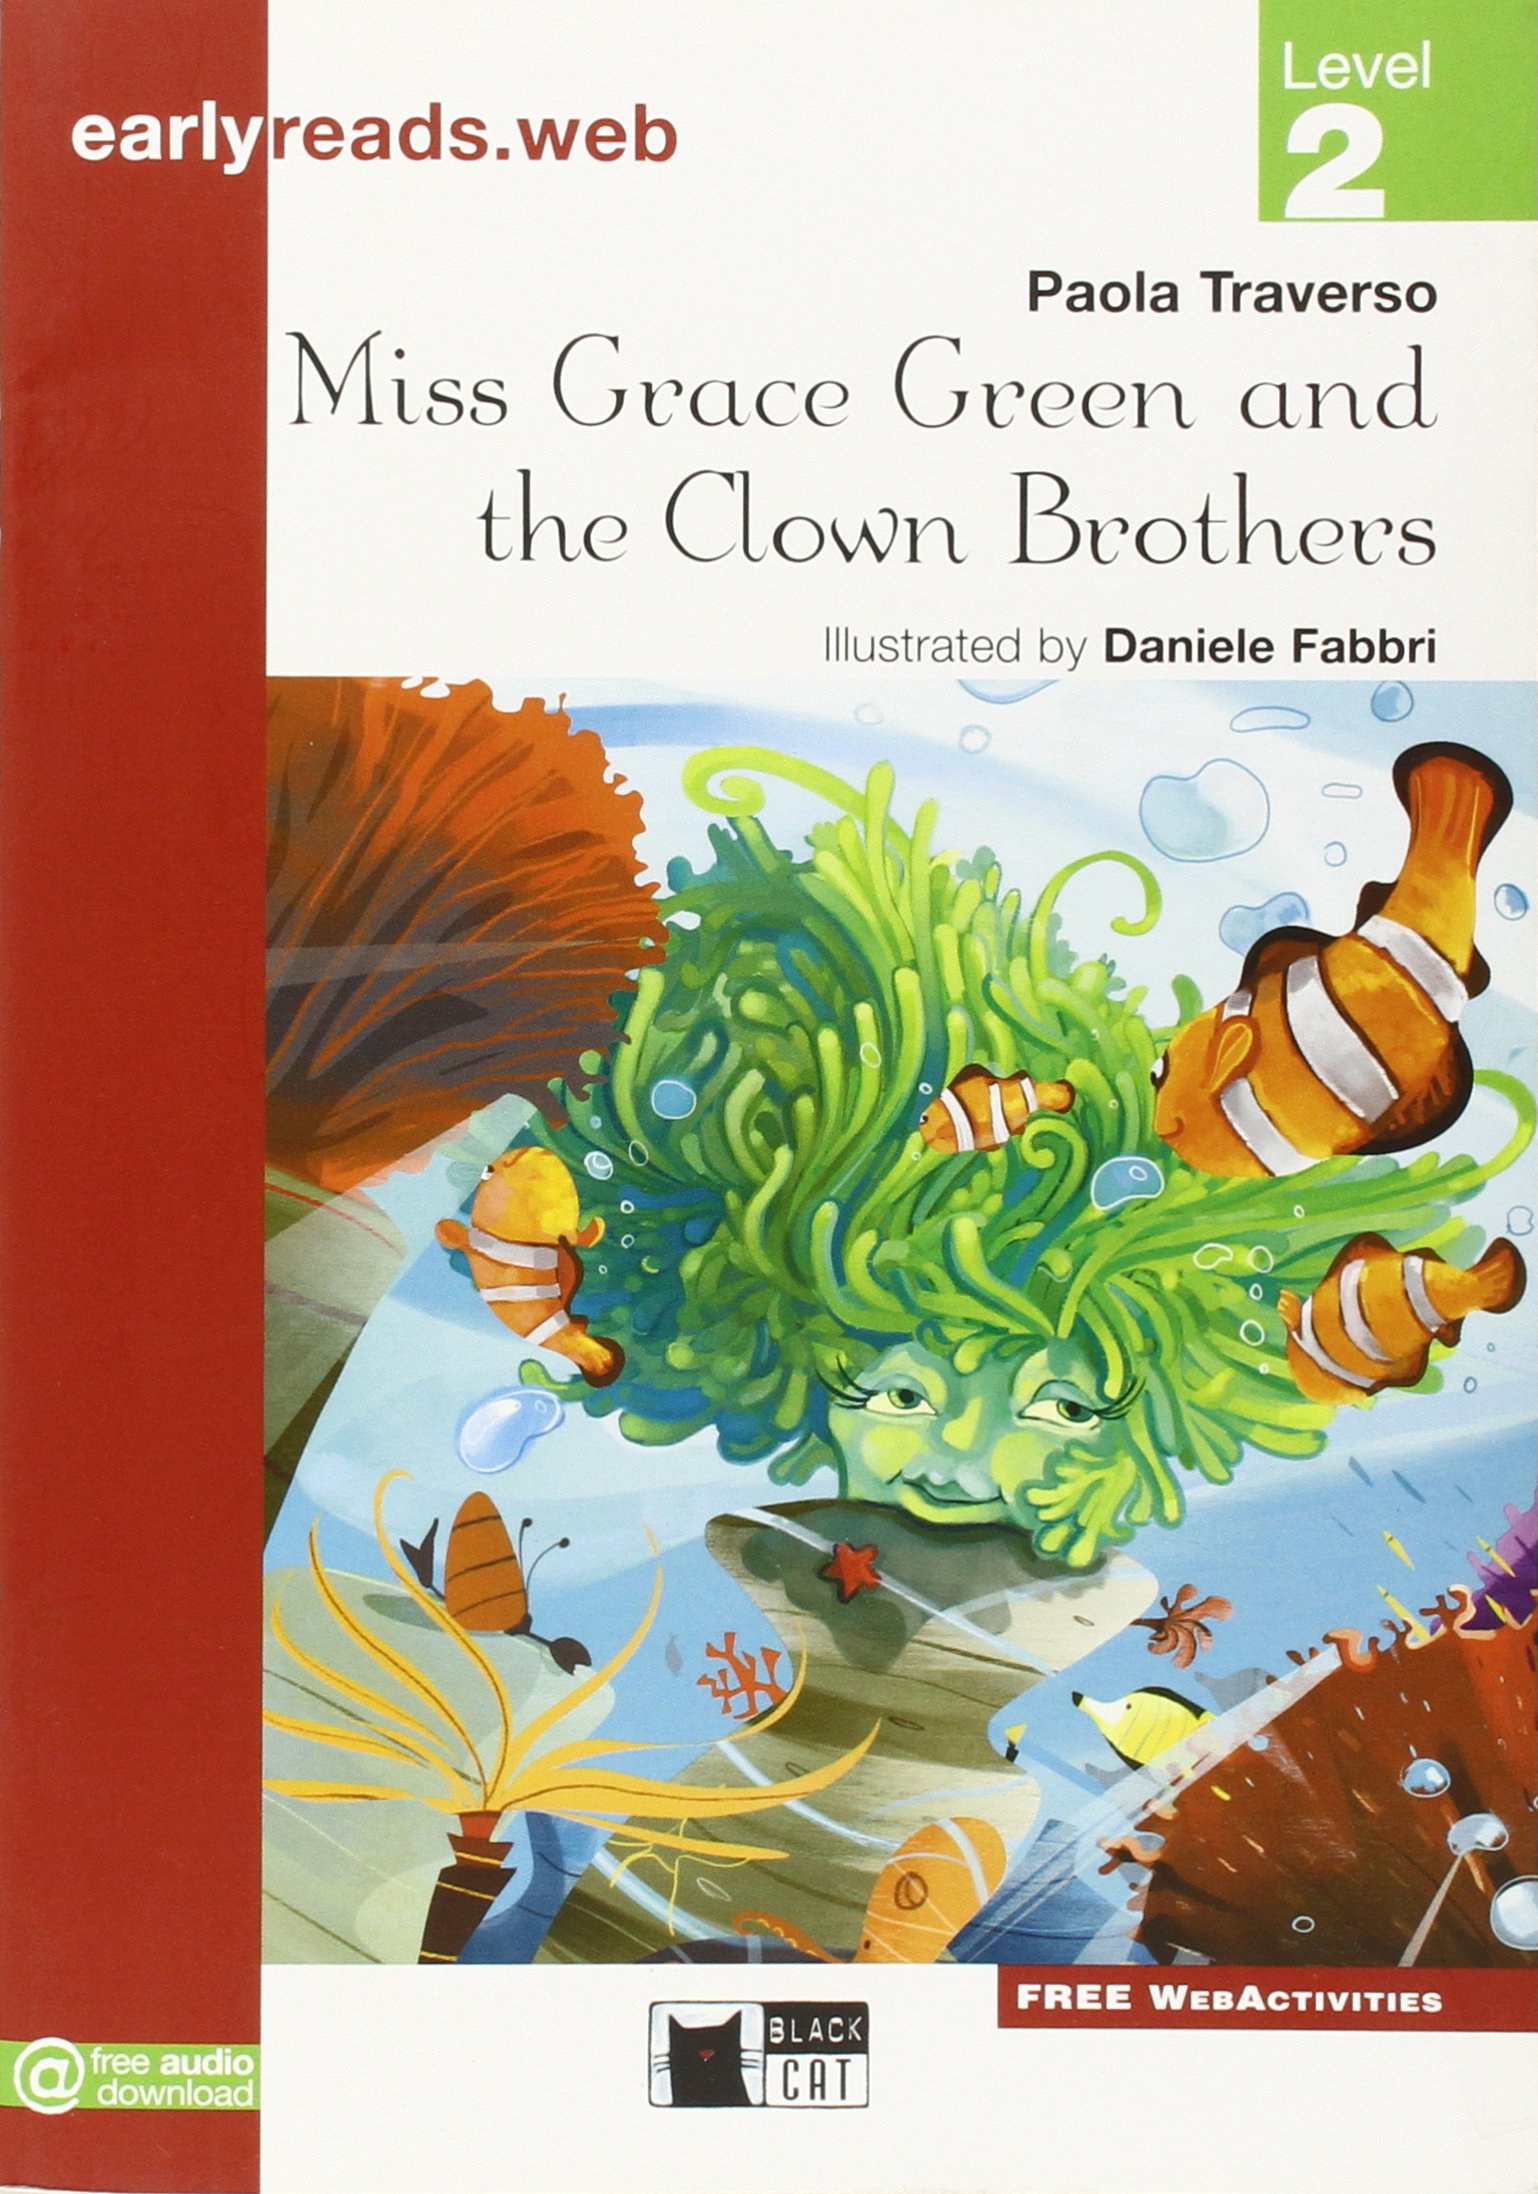 MISS GRACE GREEN AND THE CLOWN BROTHERS (EARLYREADS LEVEL 2)  Book 